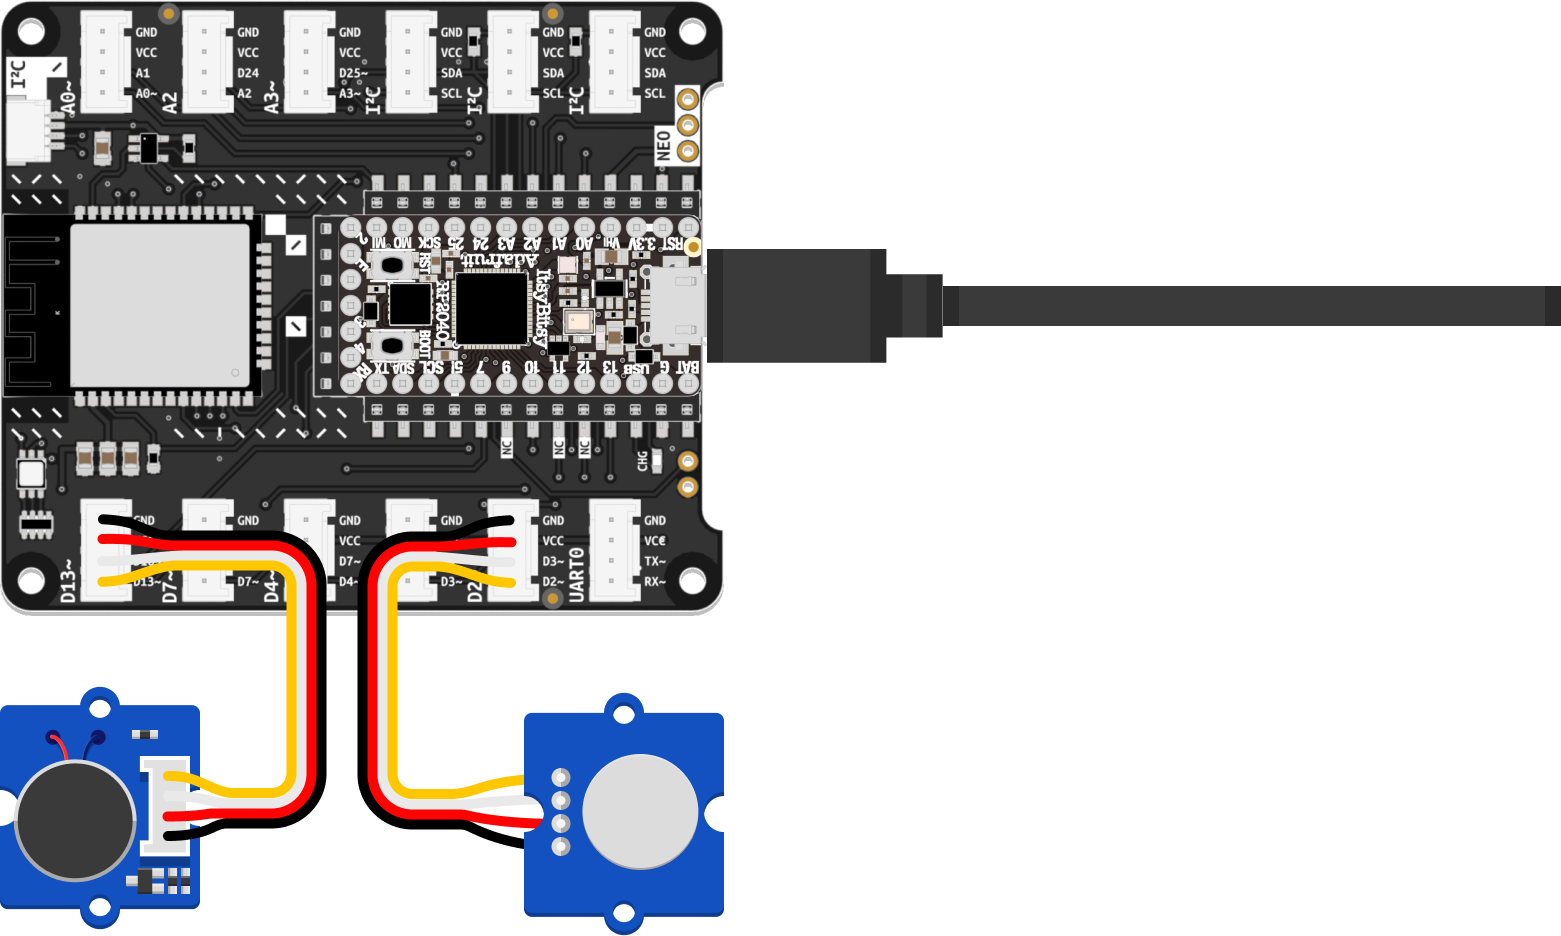 Illustration of the proper setup of touch sensor and vibration motor with the ItsyBitsy